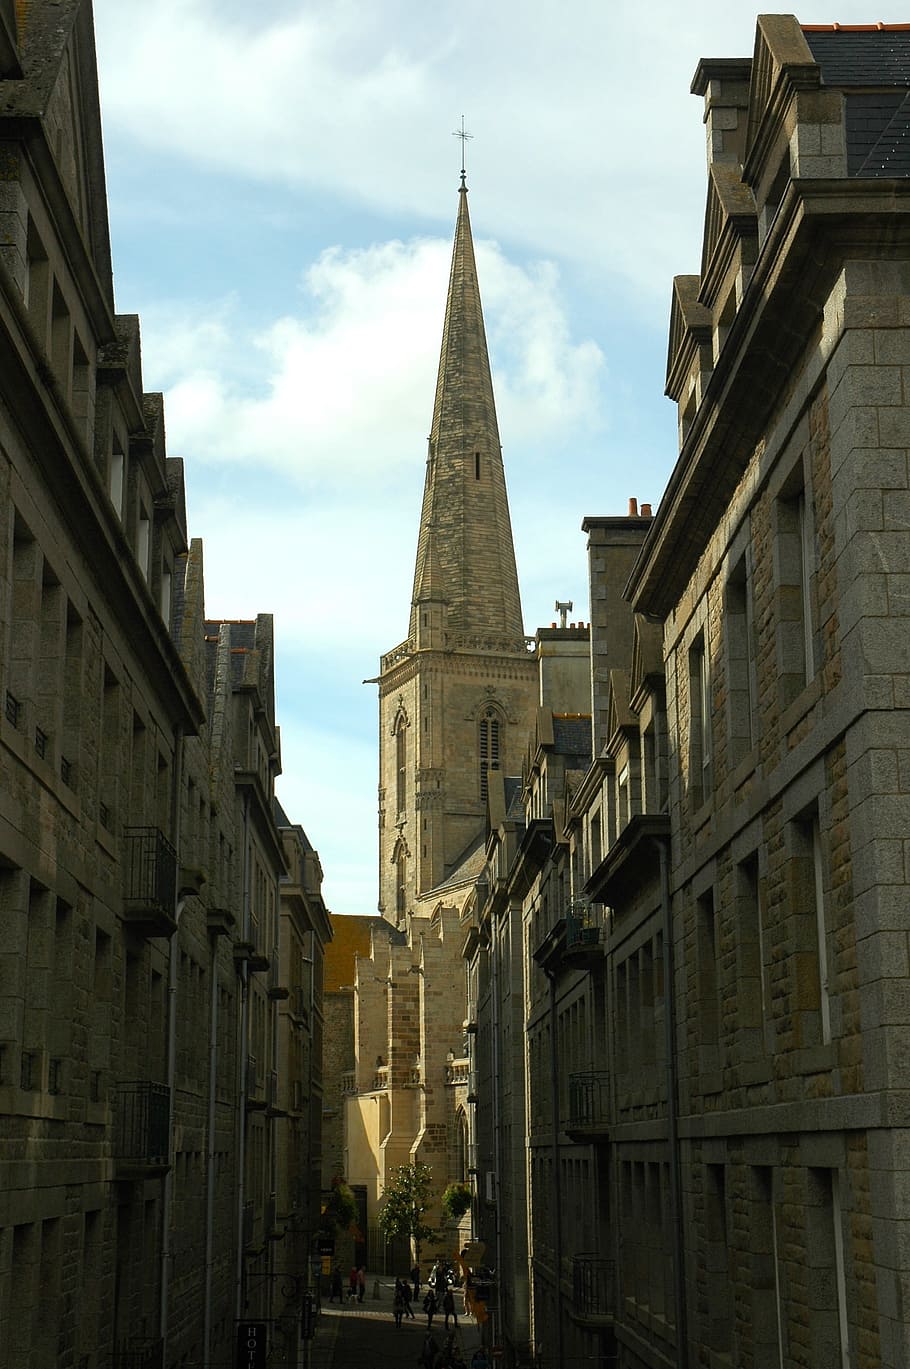 st malo, brittany, france, cathedral, fortress, corsairs, coast